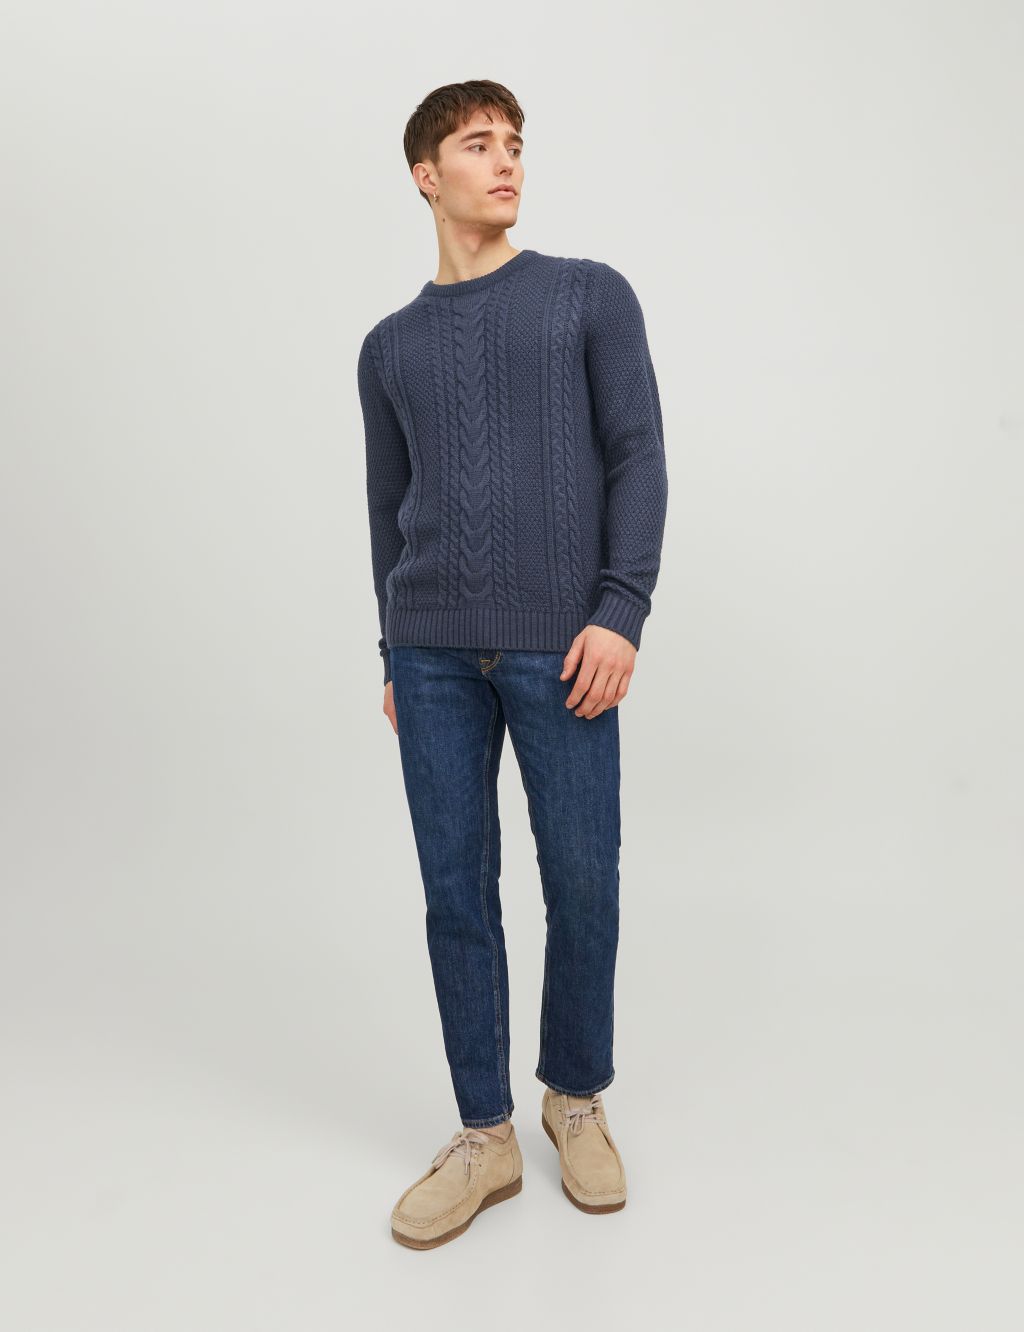 Textured Cable Crew Neck Jumper with Cotton image 4